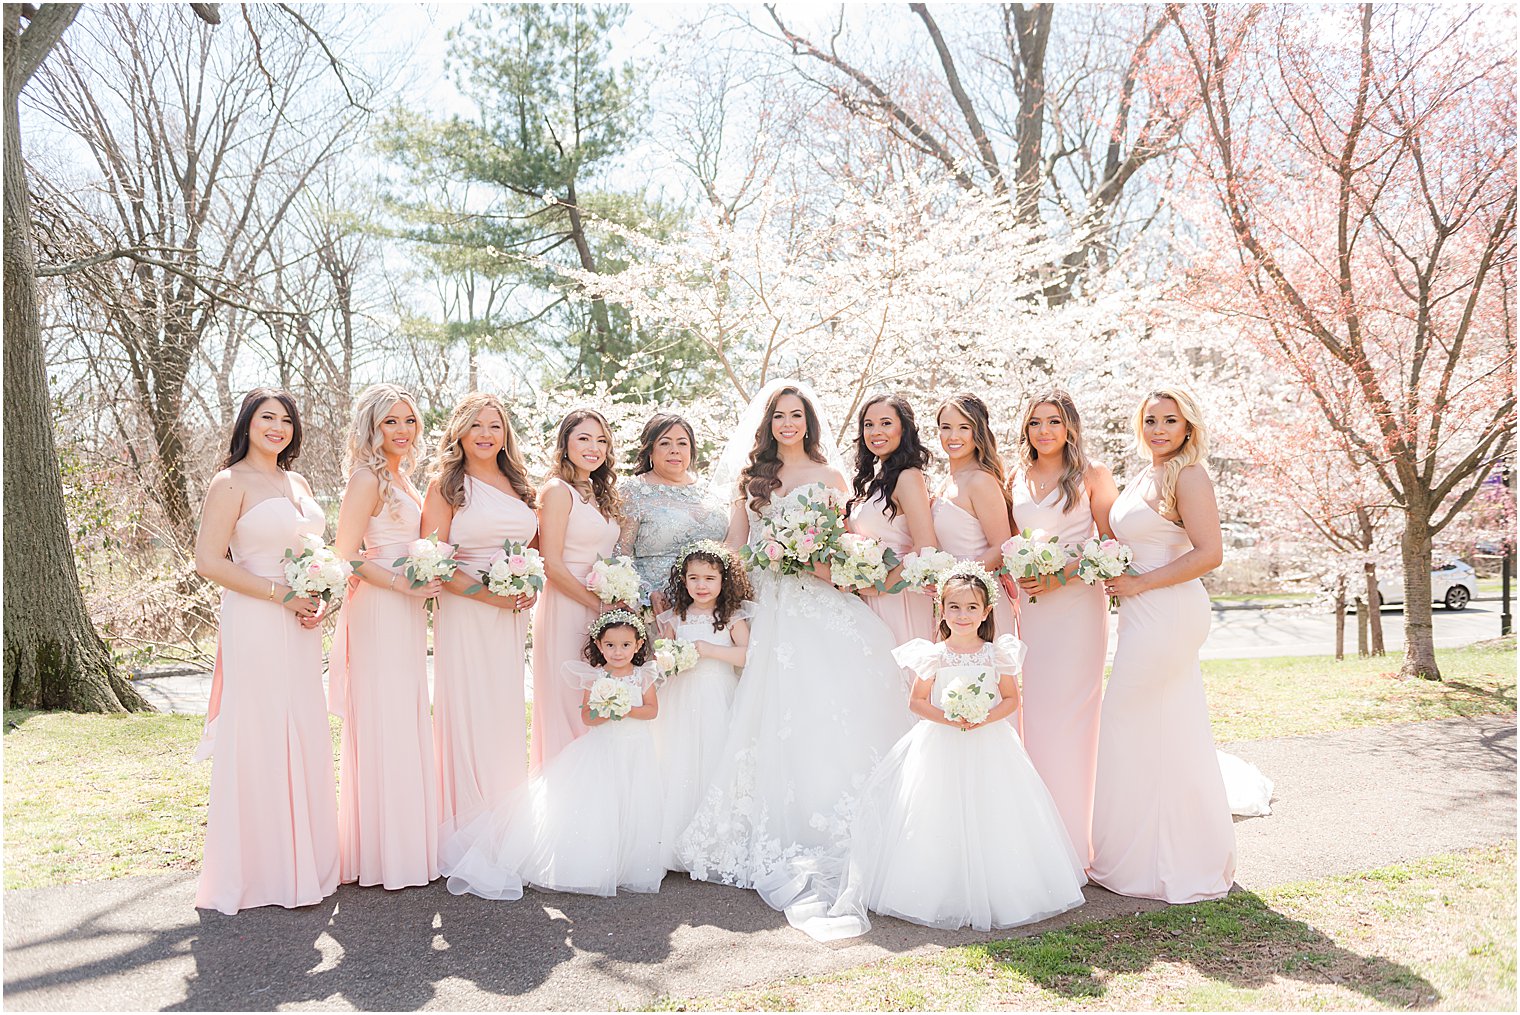 bride poses with bridesmaids in pink gowns by cherry blossoms